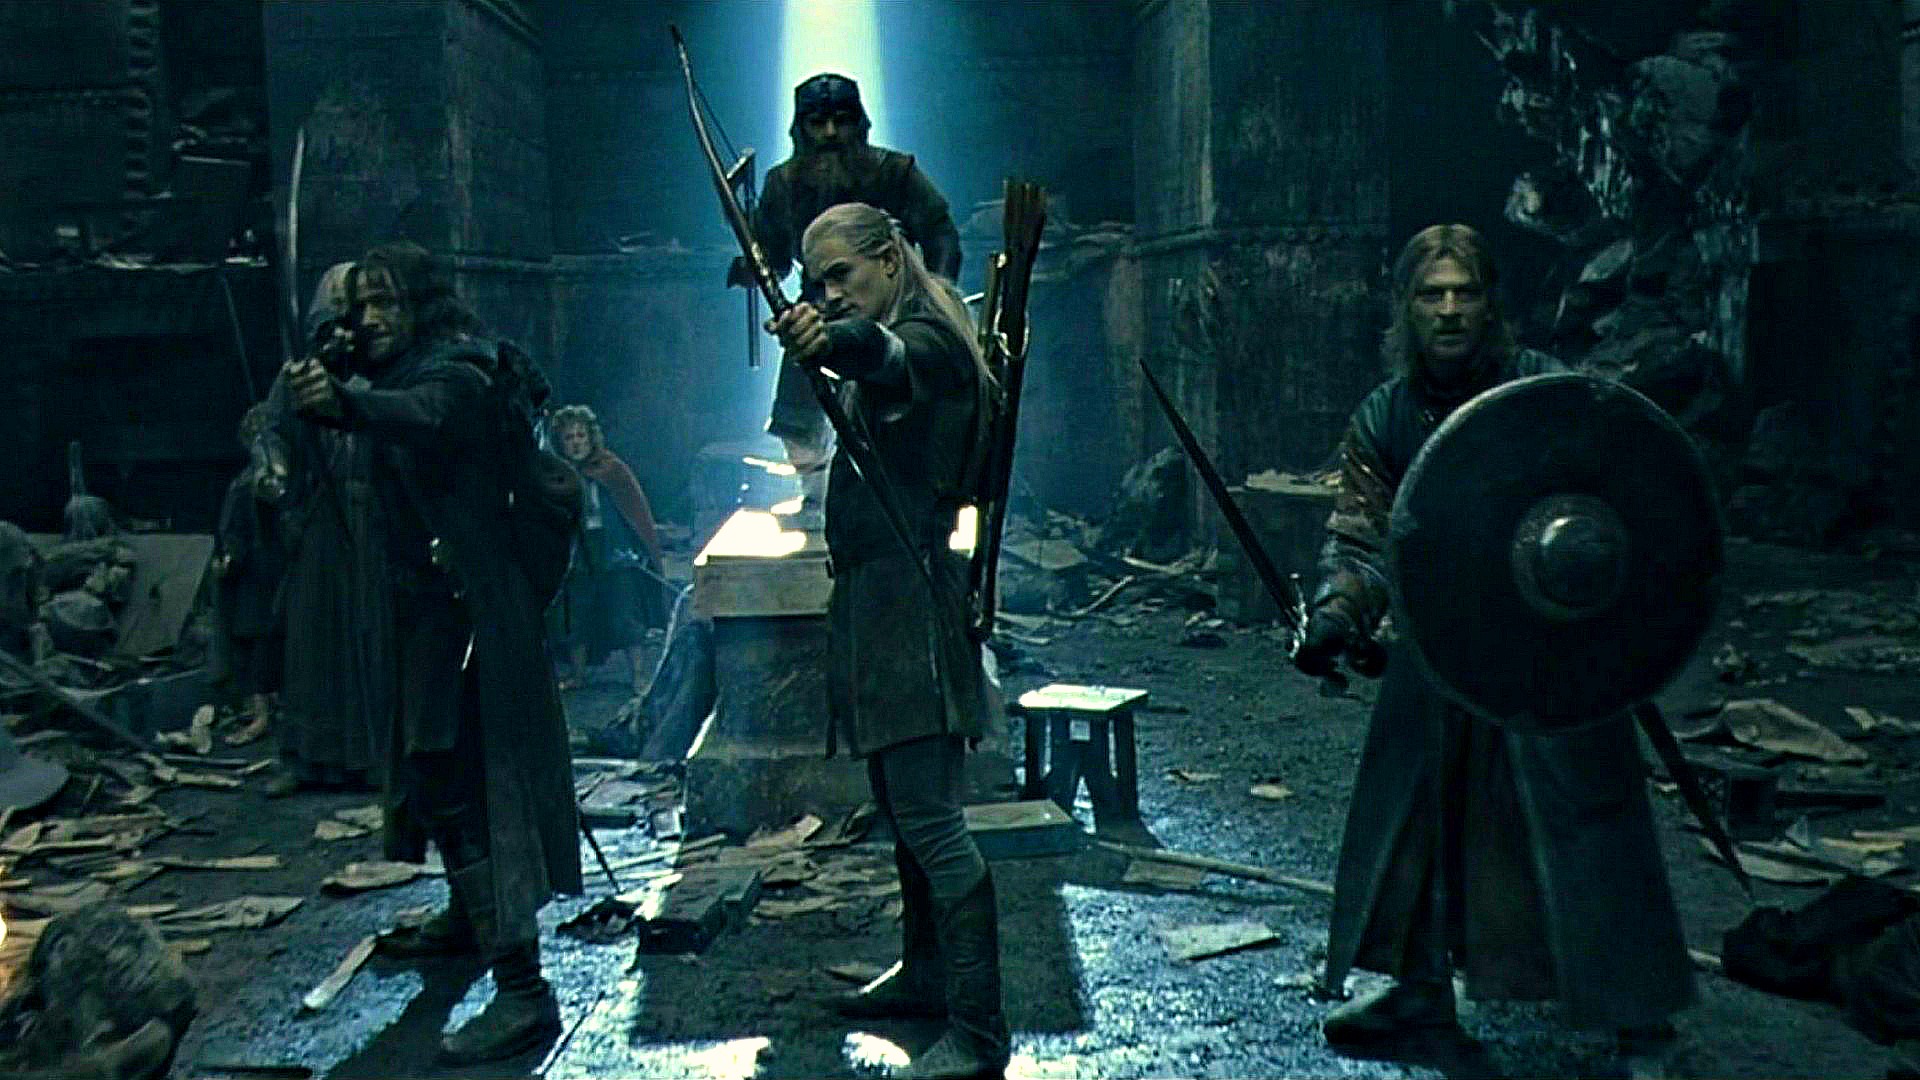 the lord of the rings - the fellowship